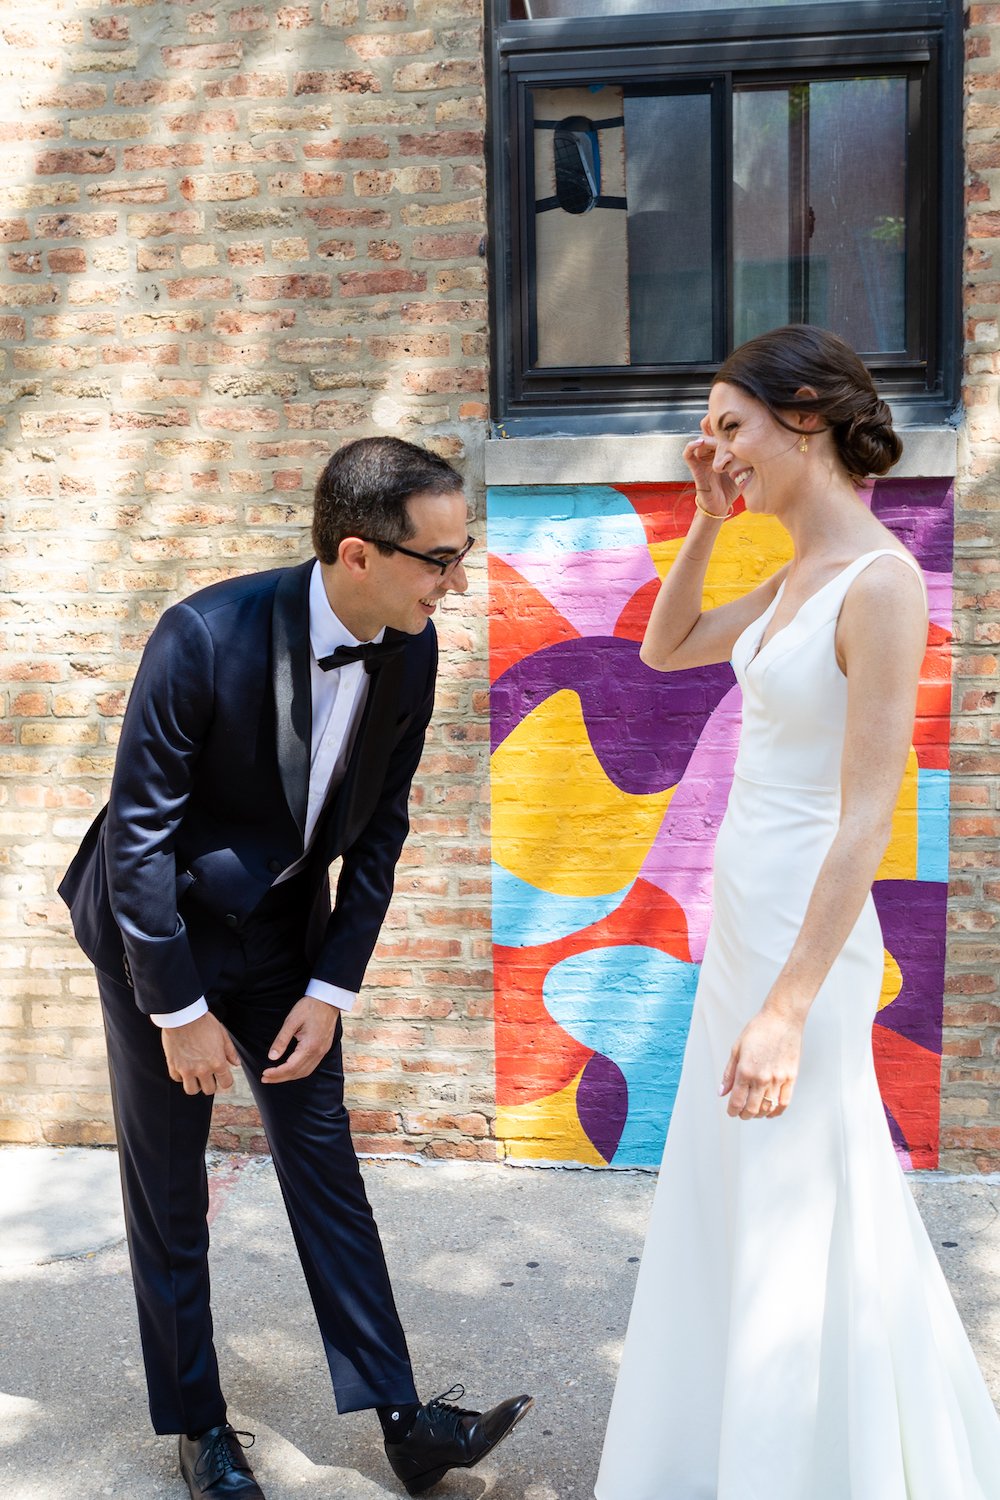 Groom_sees_bride_for_first_time_chicago_street.jpg